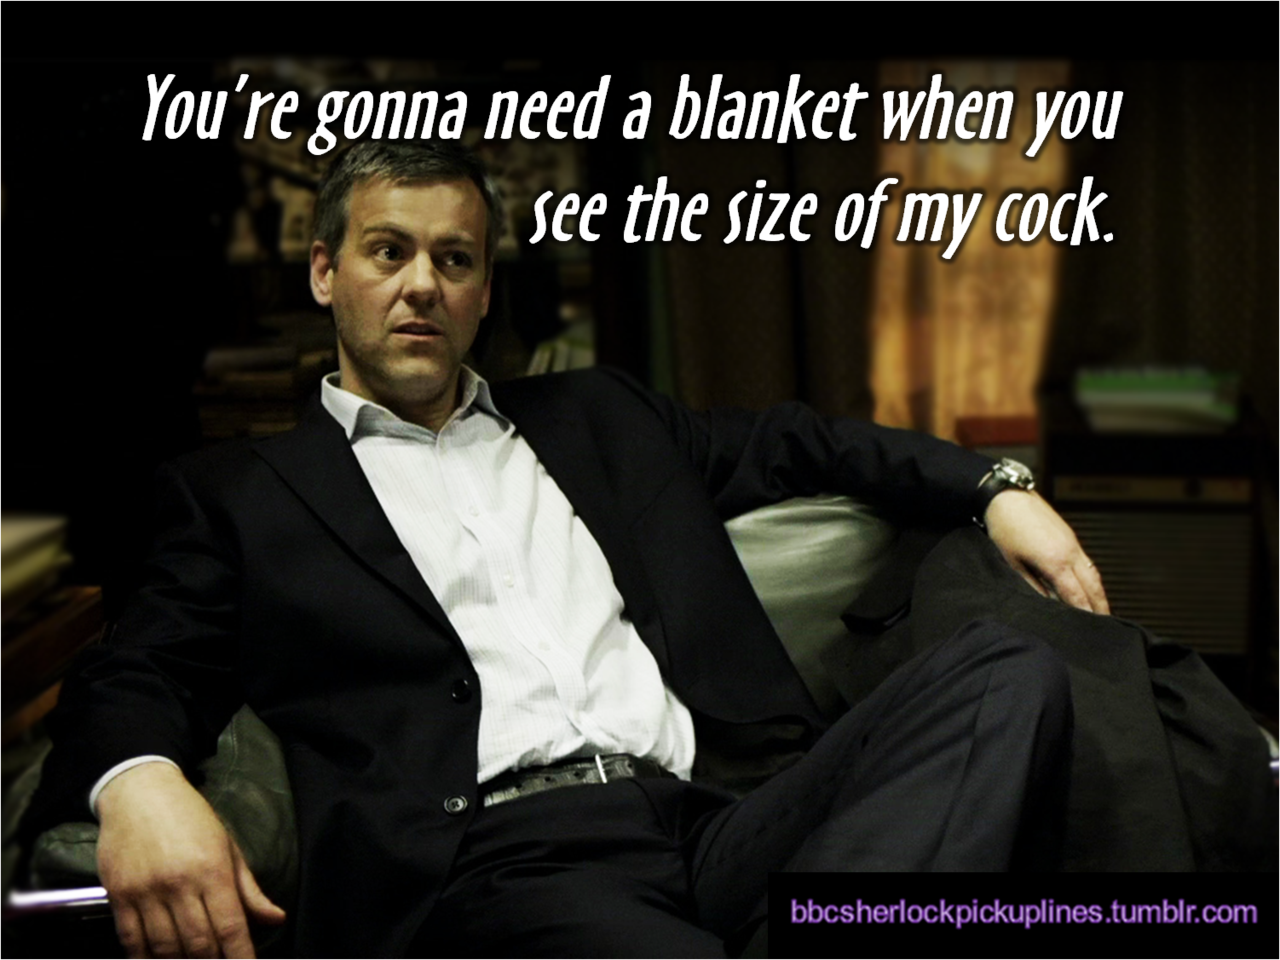 The best of A Study in Pink references, from BBC Sherlock pick-up lines.